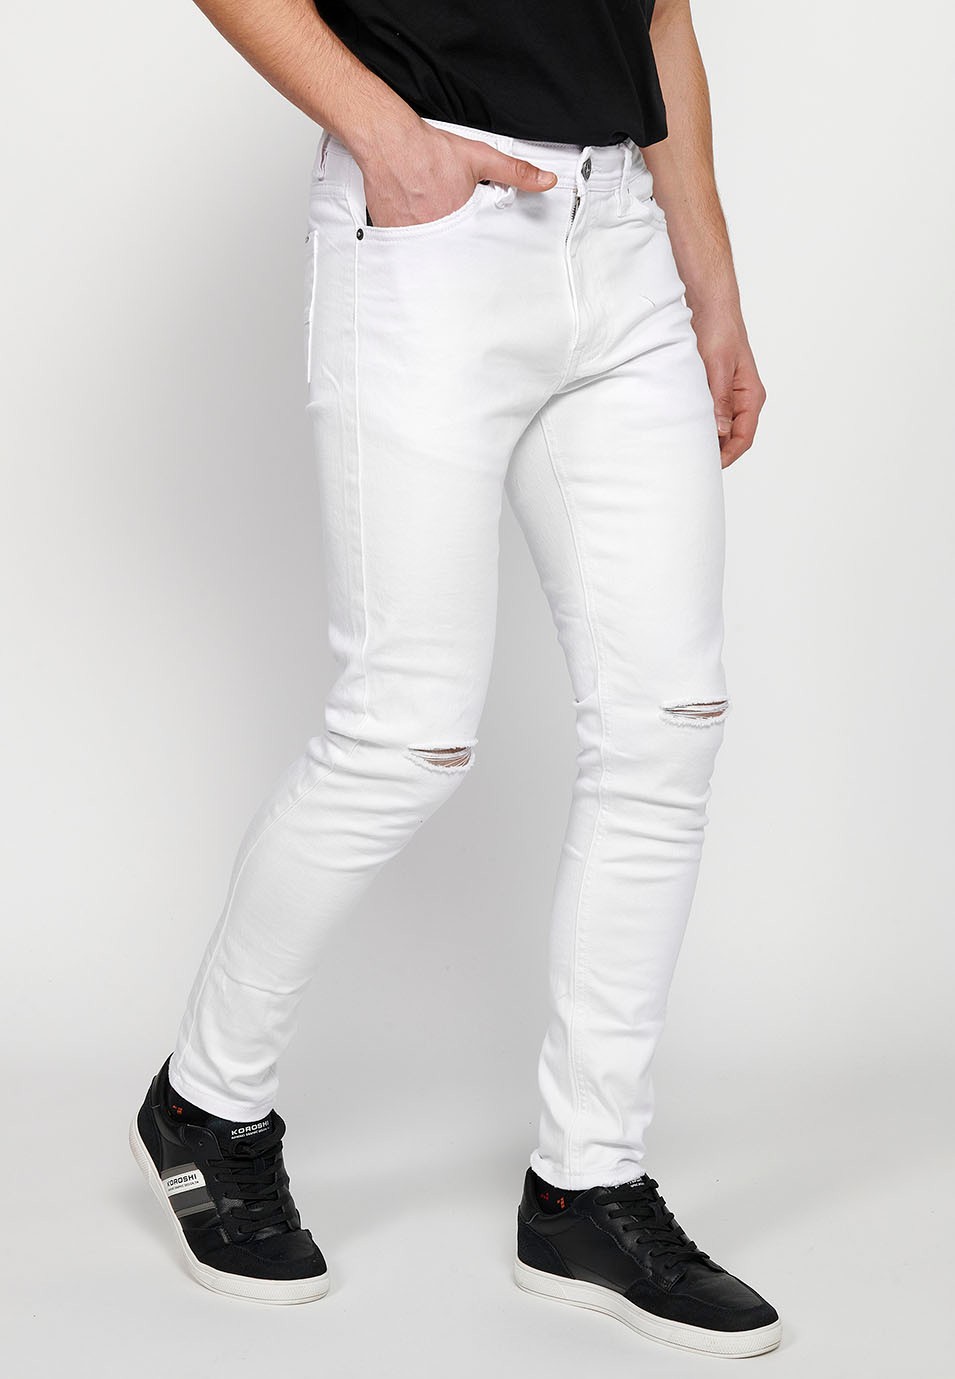 Super skinny jeans with front closure with zipper and button in White Denim for Men 3